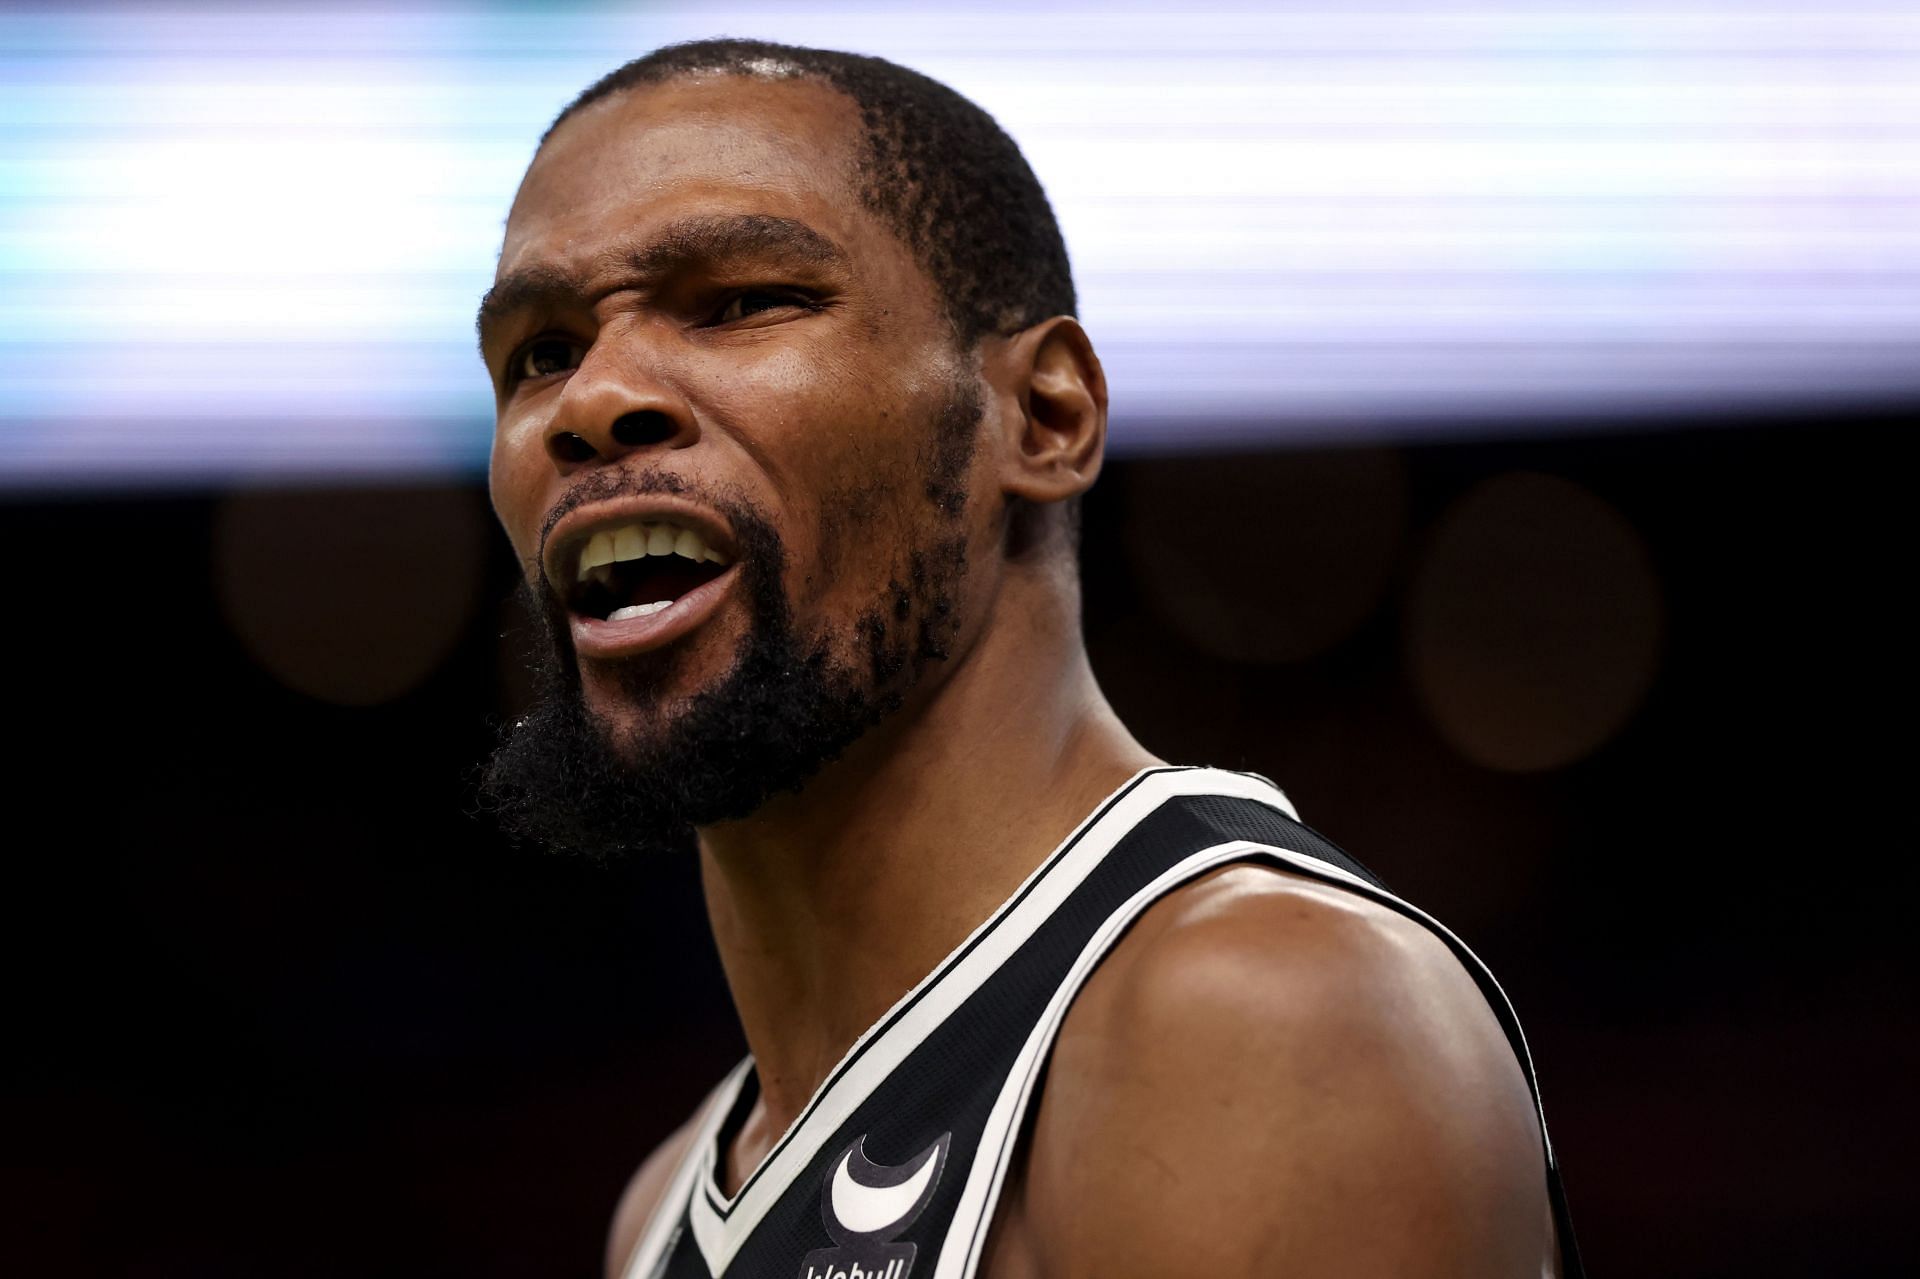 NBA Buzz - Kevin Durant is now a verb, according to Urban